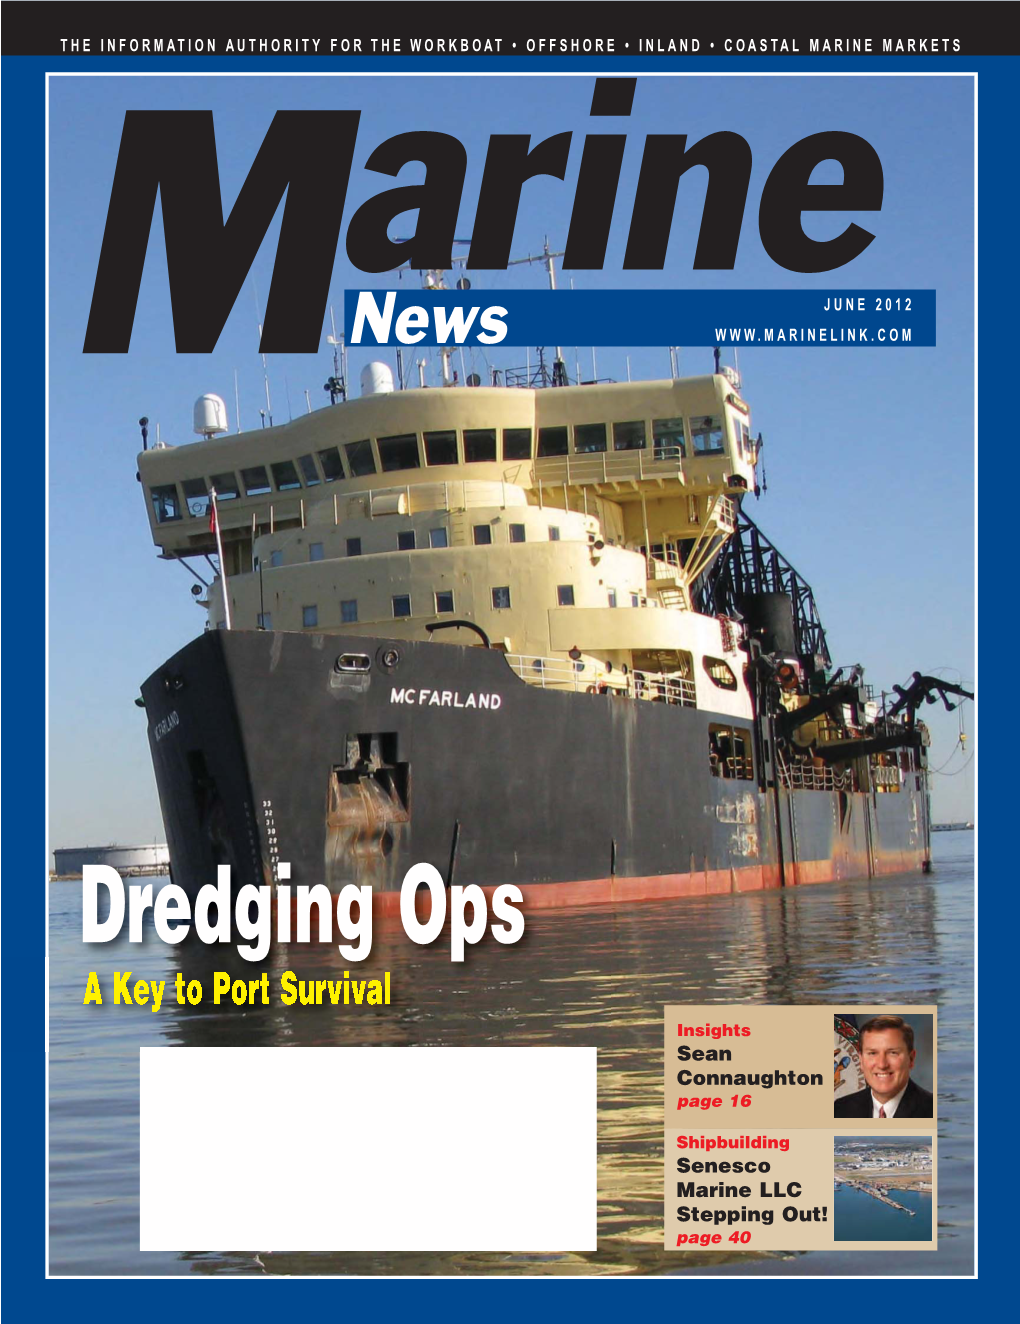 Dredging Ops a Key to Port Survival Insights Sean Connaughton Page 16